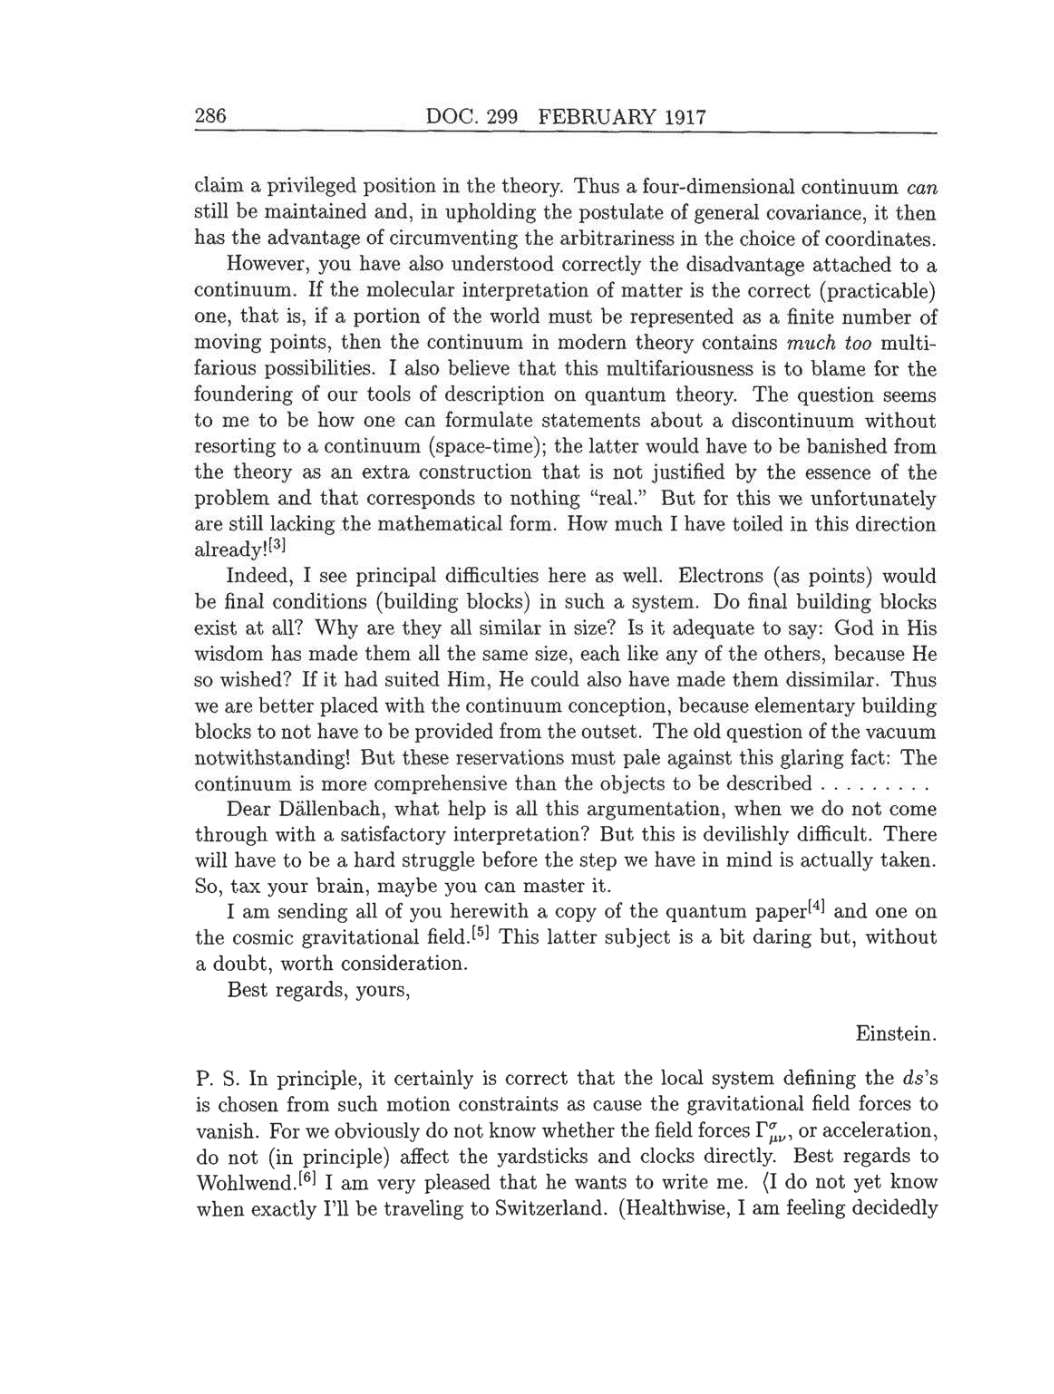 Volume 8: The Berlin Years: Correspondence, 1914-1918 (English translation supplement) page 286